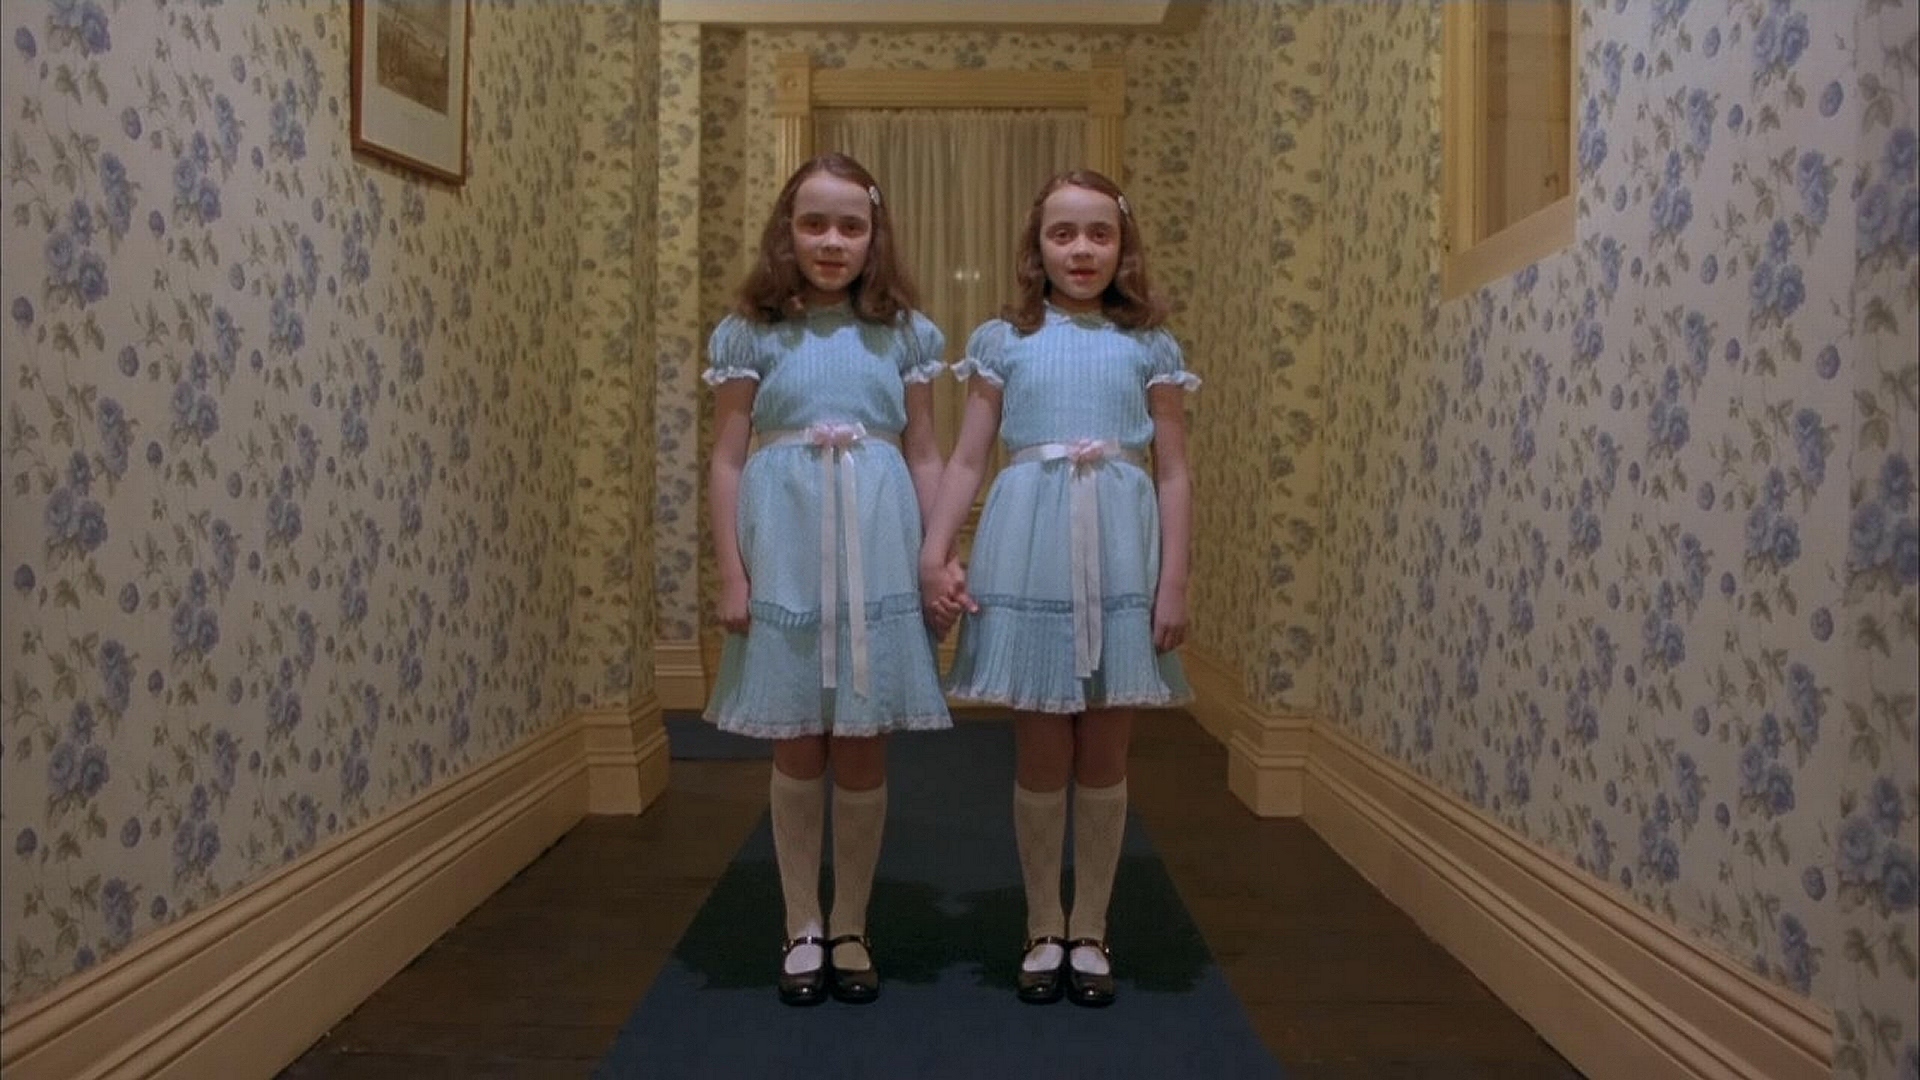 The Shining Twins Children Stanley Kubrick Horror Movies 1980 Year Frontal View 1920x1080